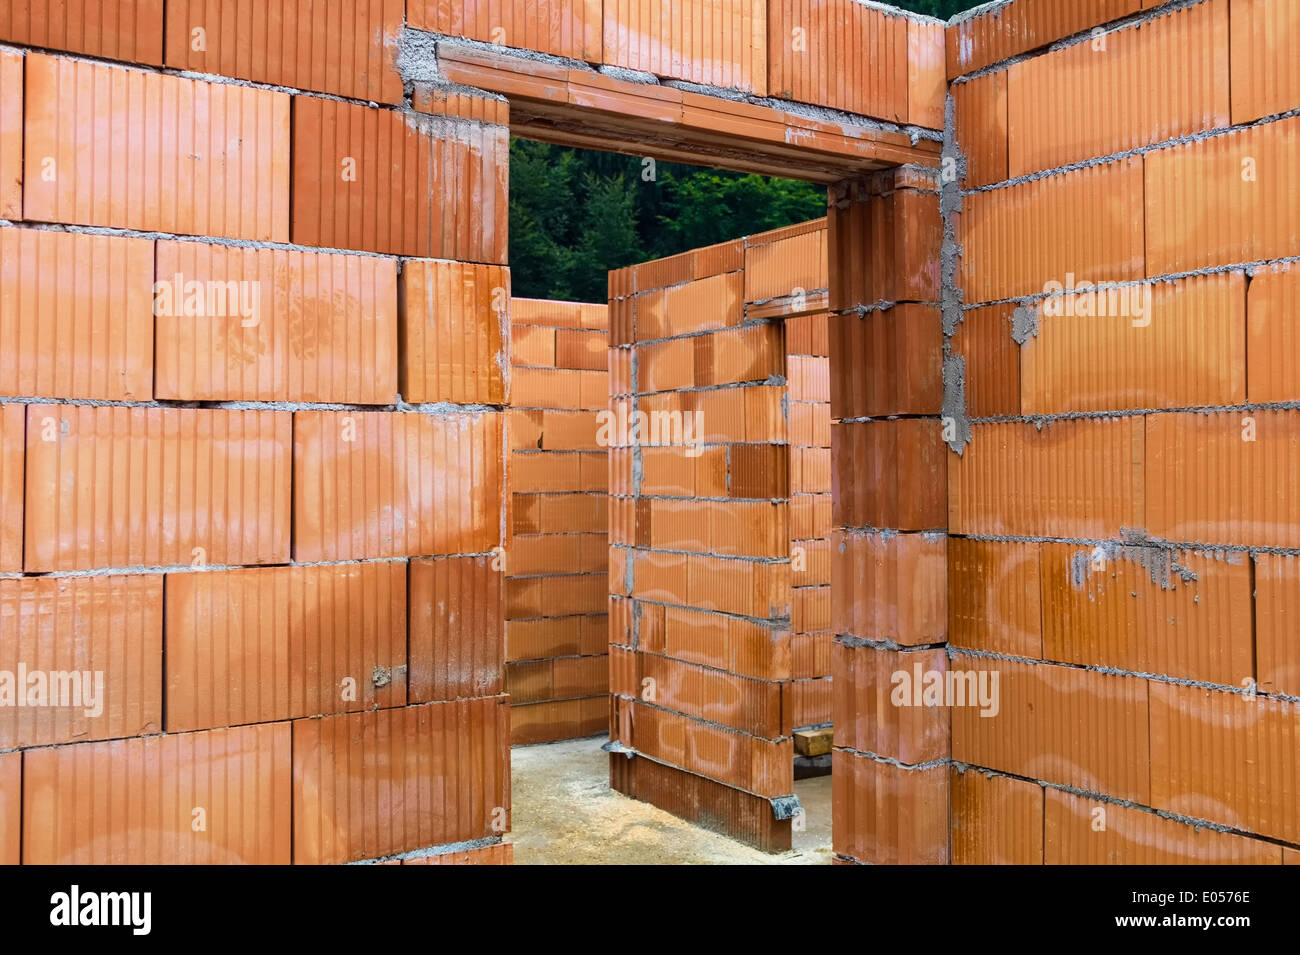 The shell of a single-family dwelling in brick massive construction. Building site for building of a house., Der Rohbau eines Ei Stock Photo